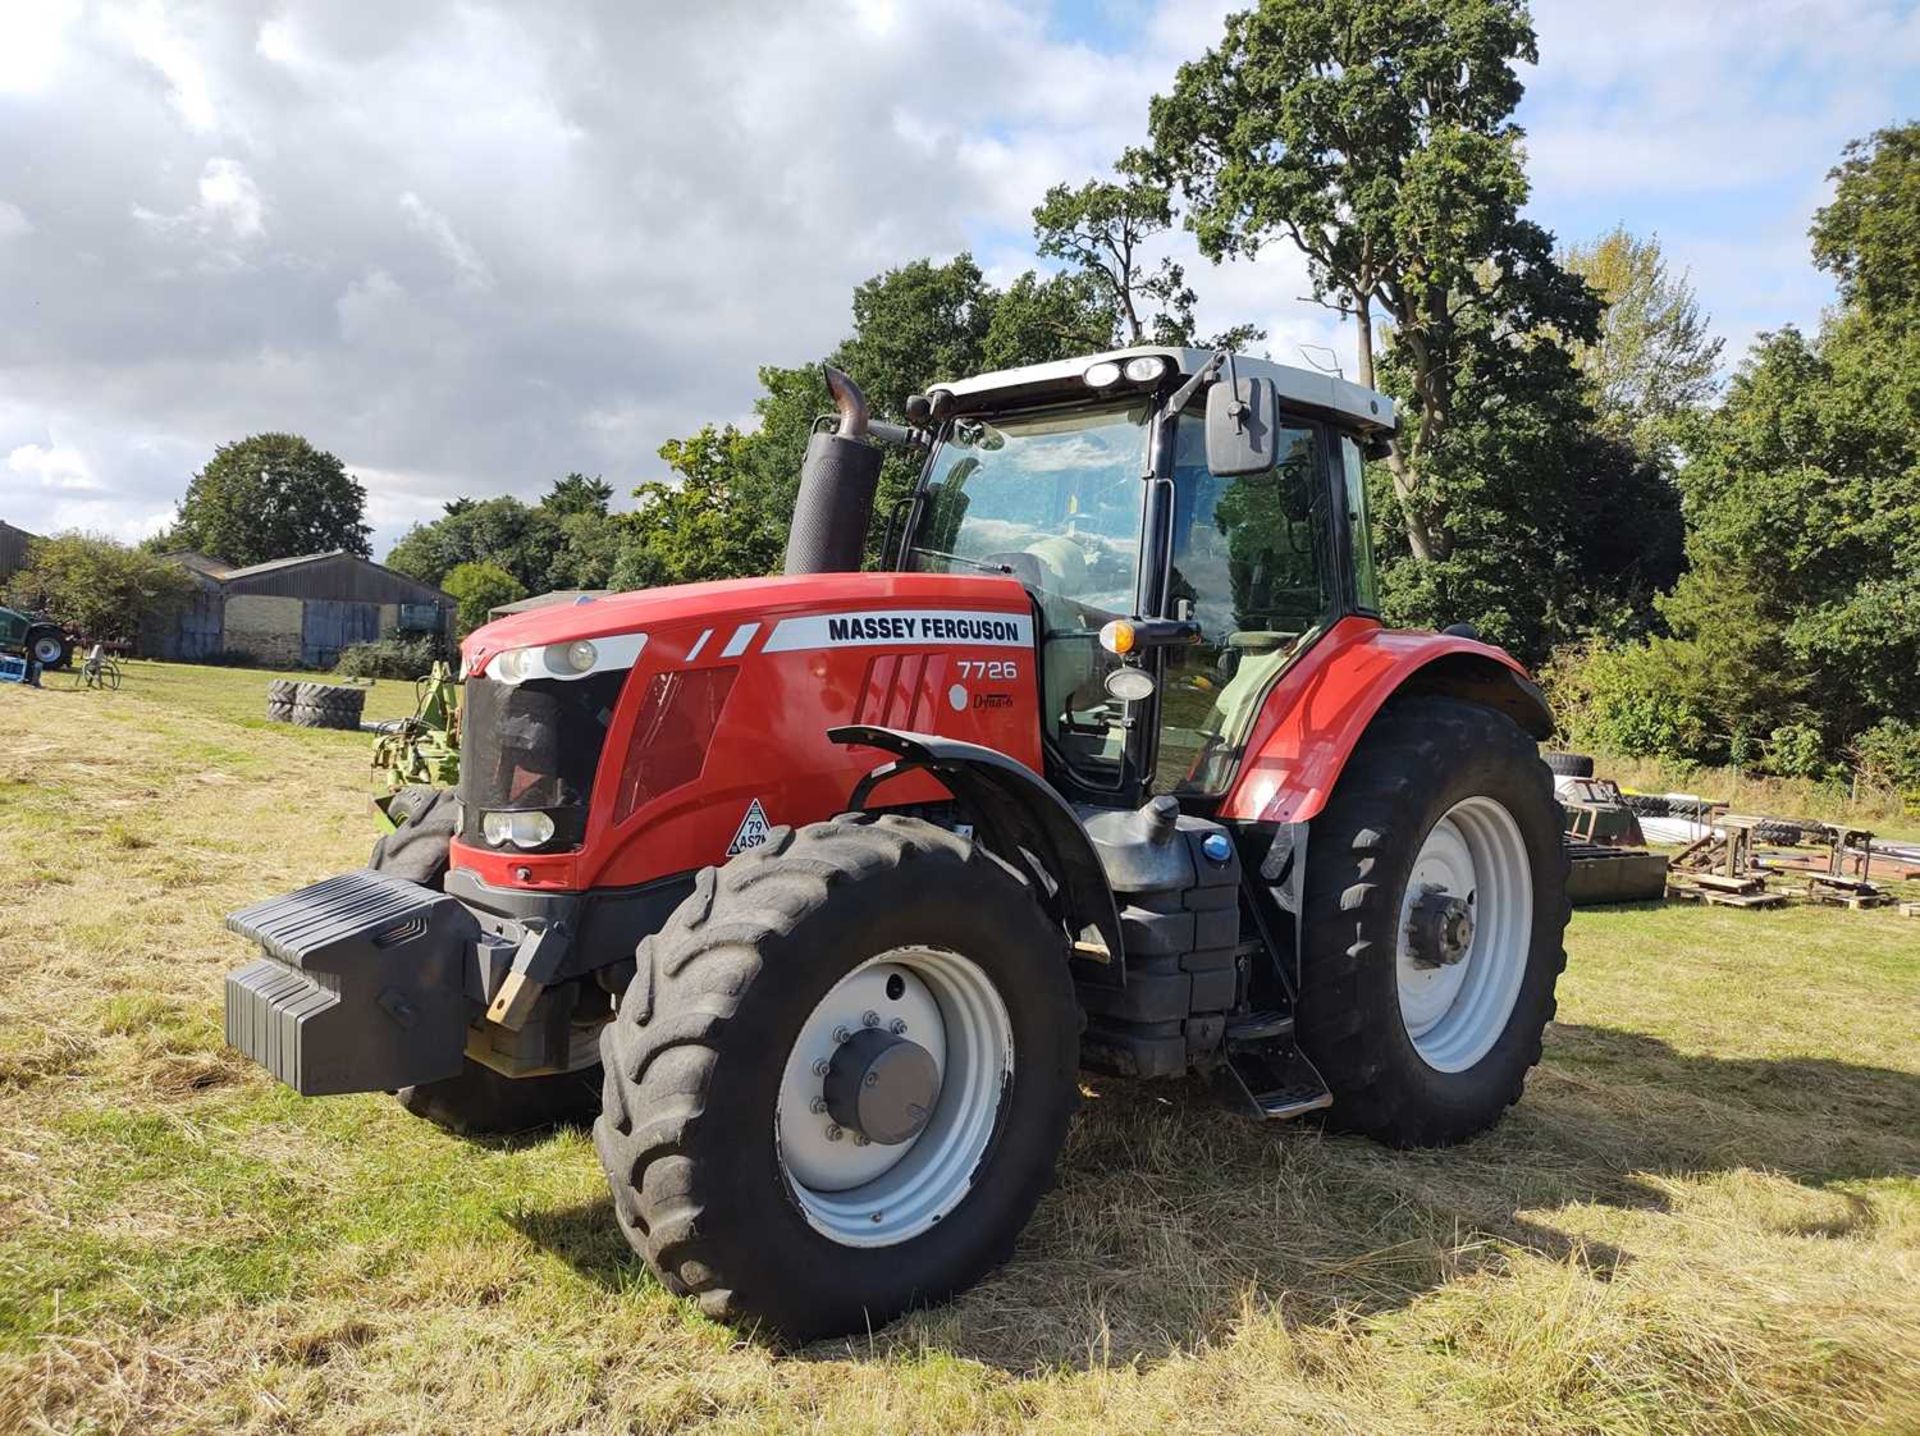 2018 Massey Ferguson 7726 Dyna 6 Approx. 4,250 Hrs 480/70 R30 620/70 R42 Tyres - Image 4 of 8